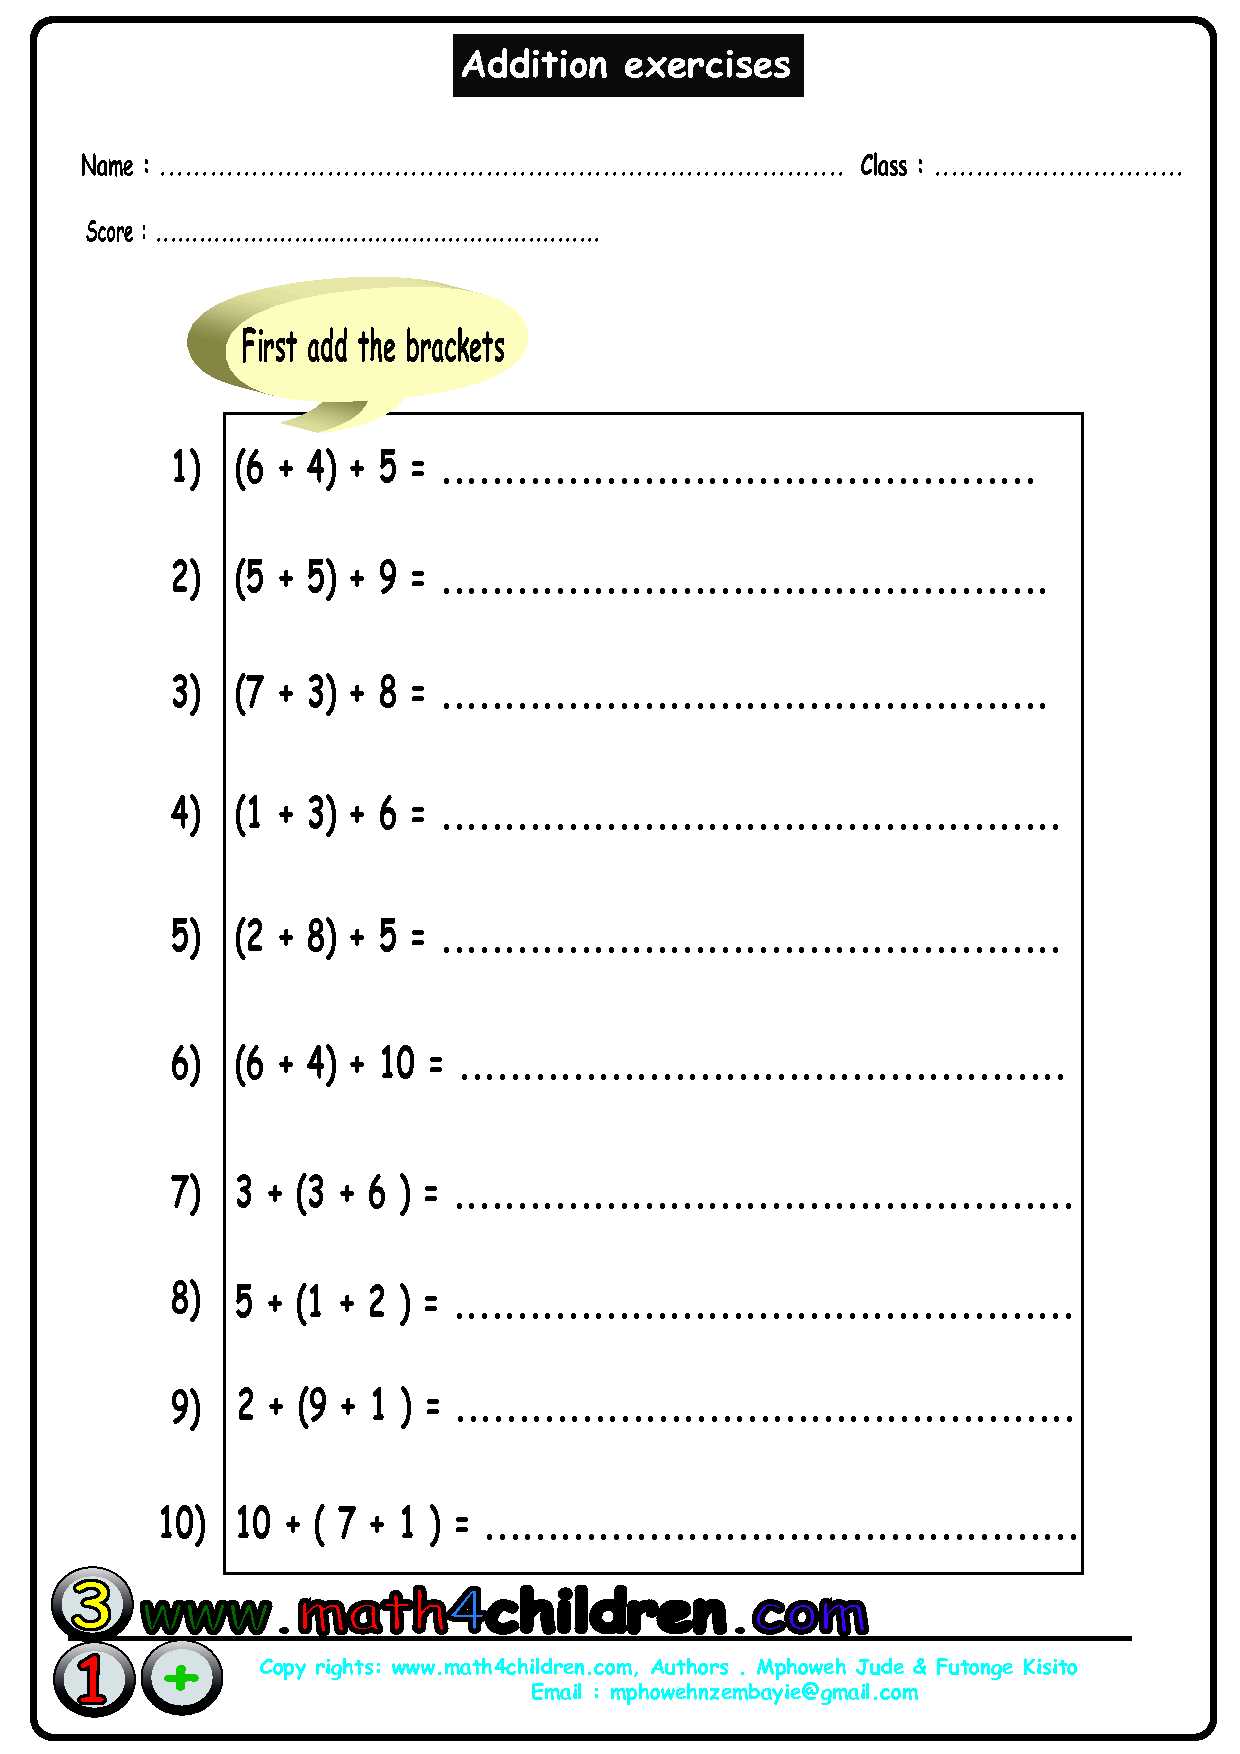 9th Grade Math Worksheets with Answer Key together with Math 9th Grade Worksheets Image Collections Worksheet for Kids